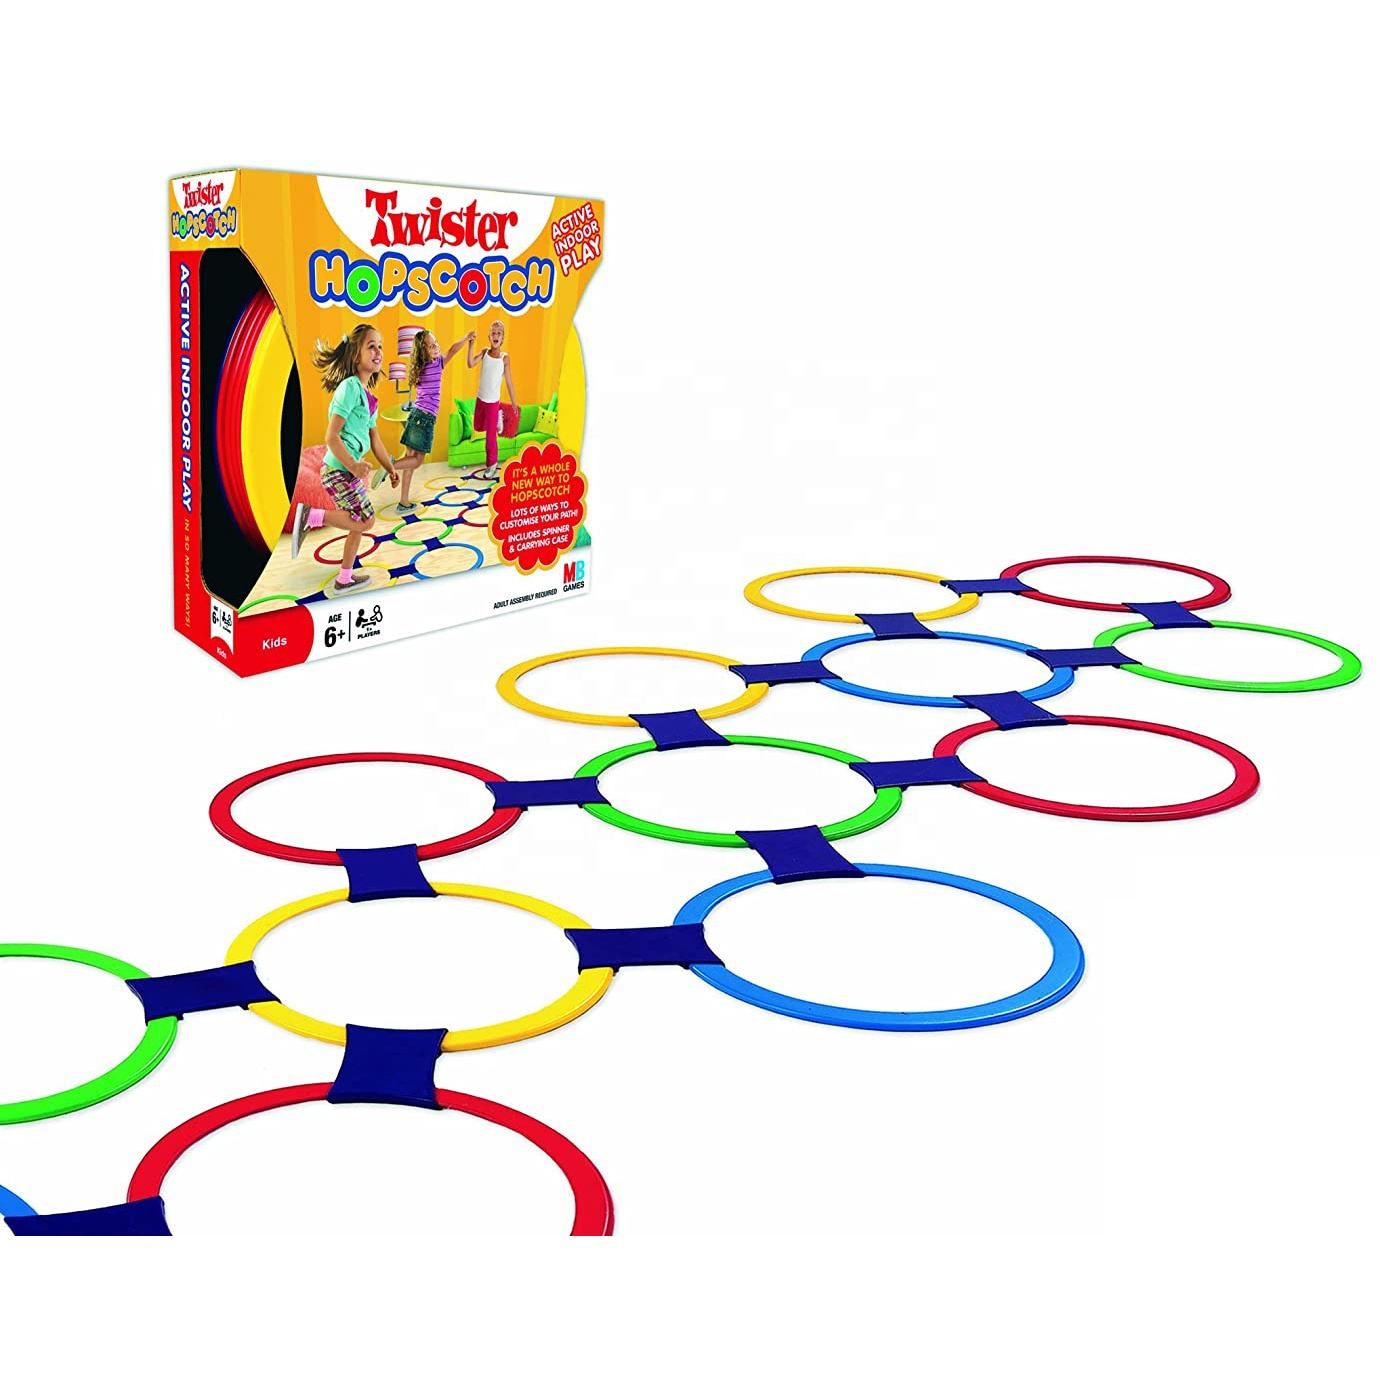 Classical toy indoor outdoor sport twister hopscotch game 13pcs hopscotches rings toy for kids conditioning agility training